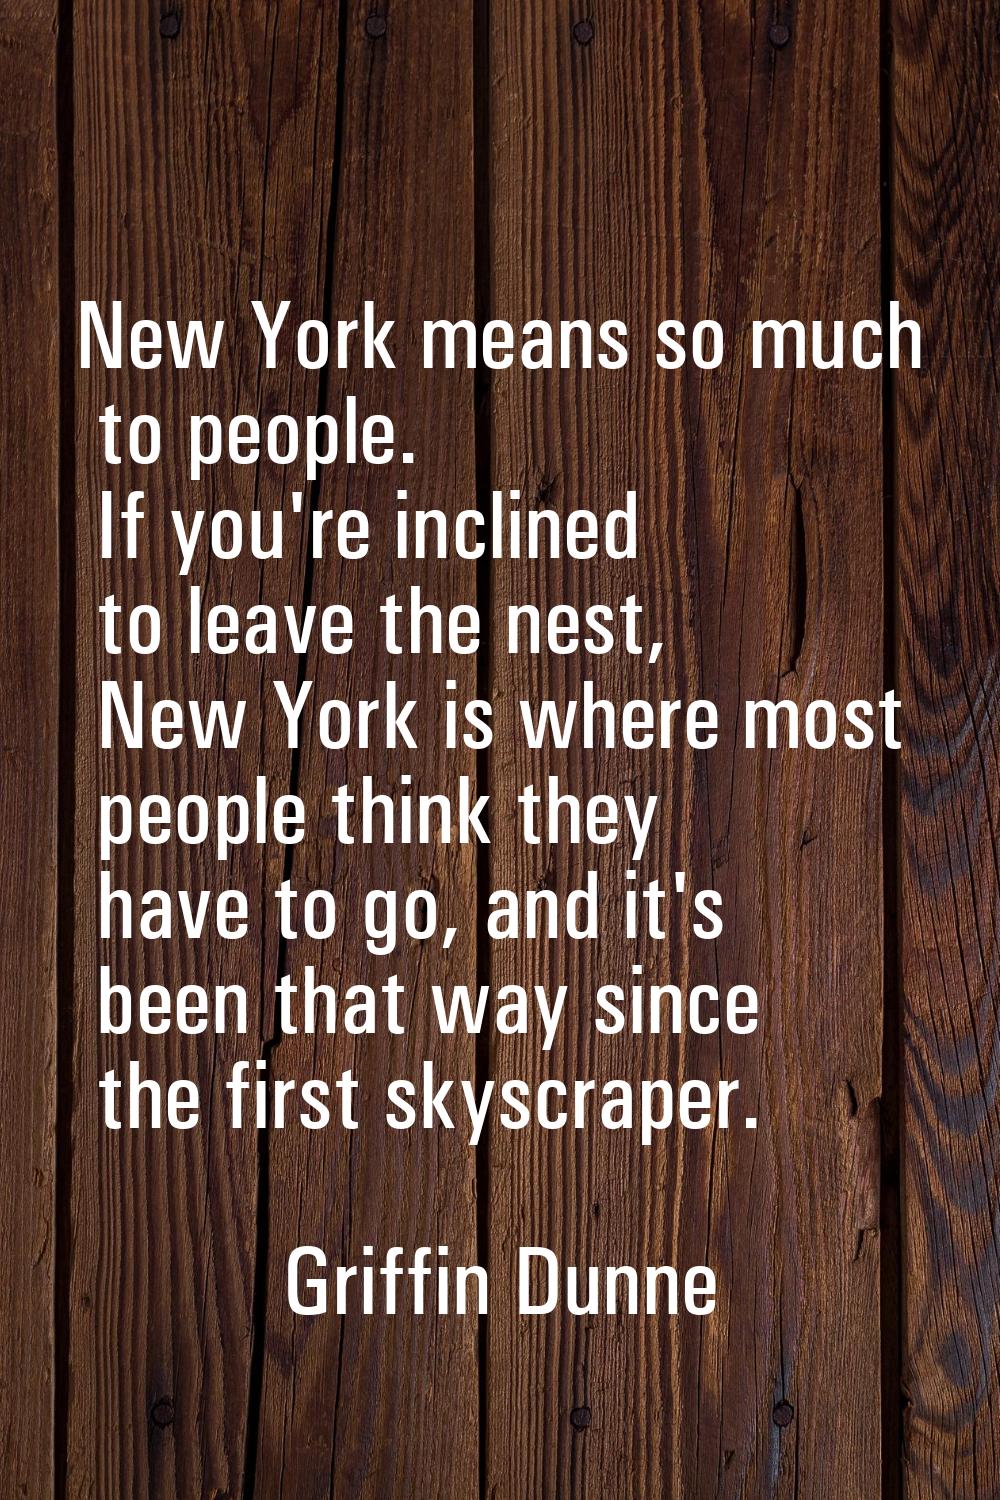 New York means so much to people. If you're inclined to leave the nest, New York is where most peop